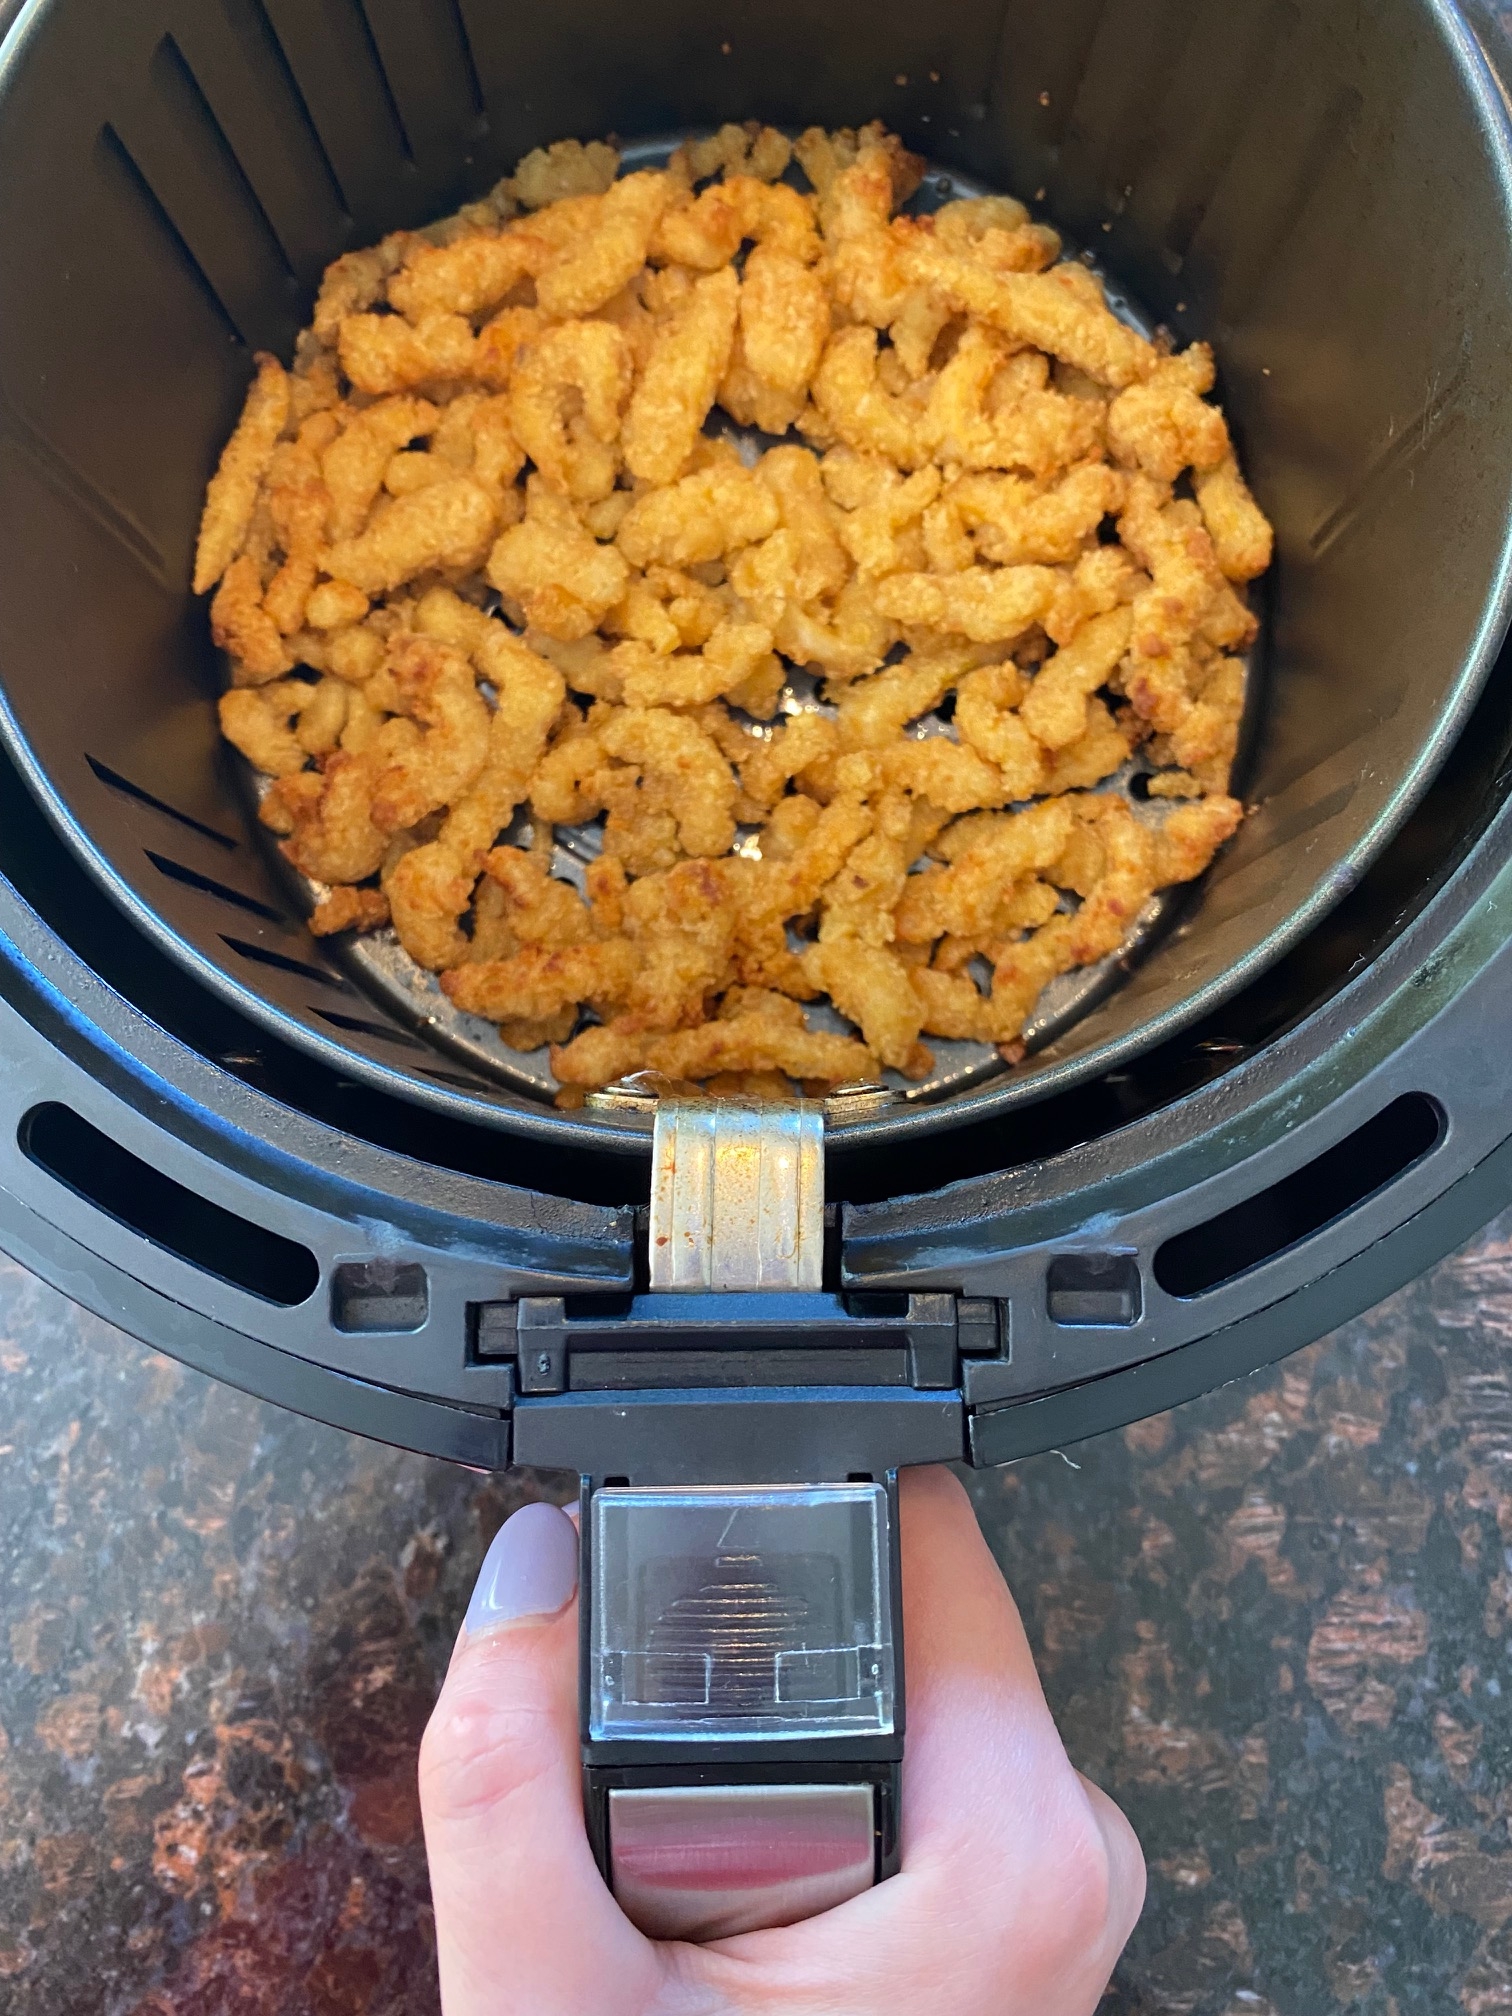 Hand removing basket from tabletop convection oven with cooked clam strips in it.